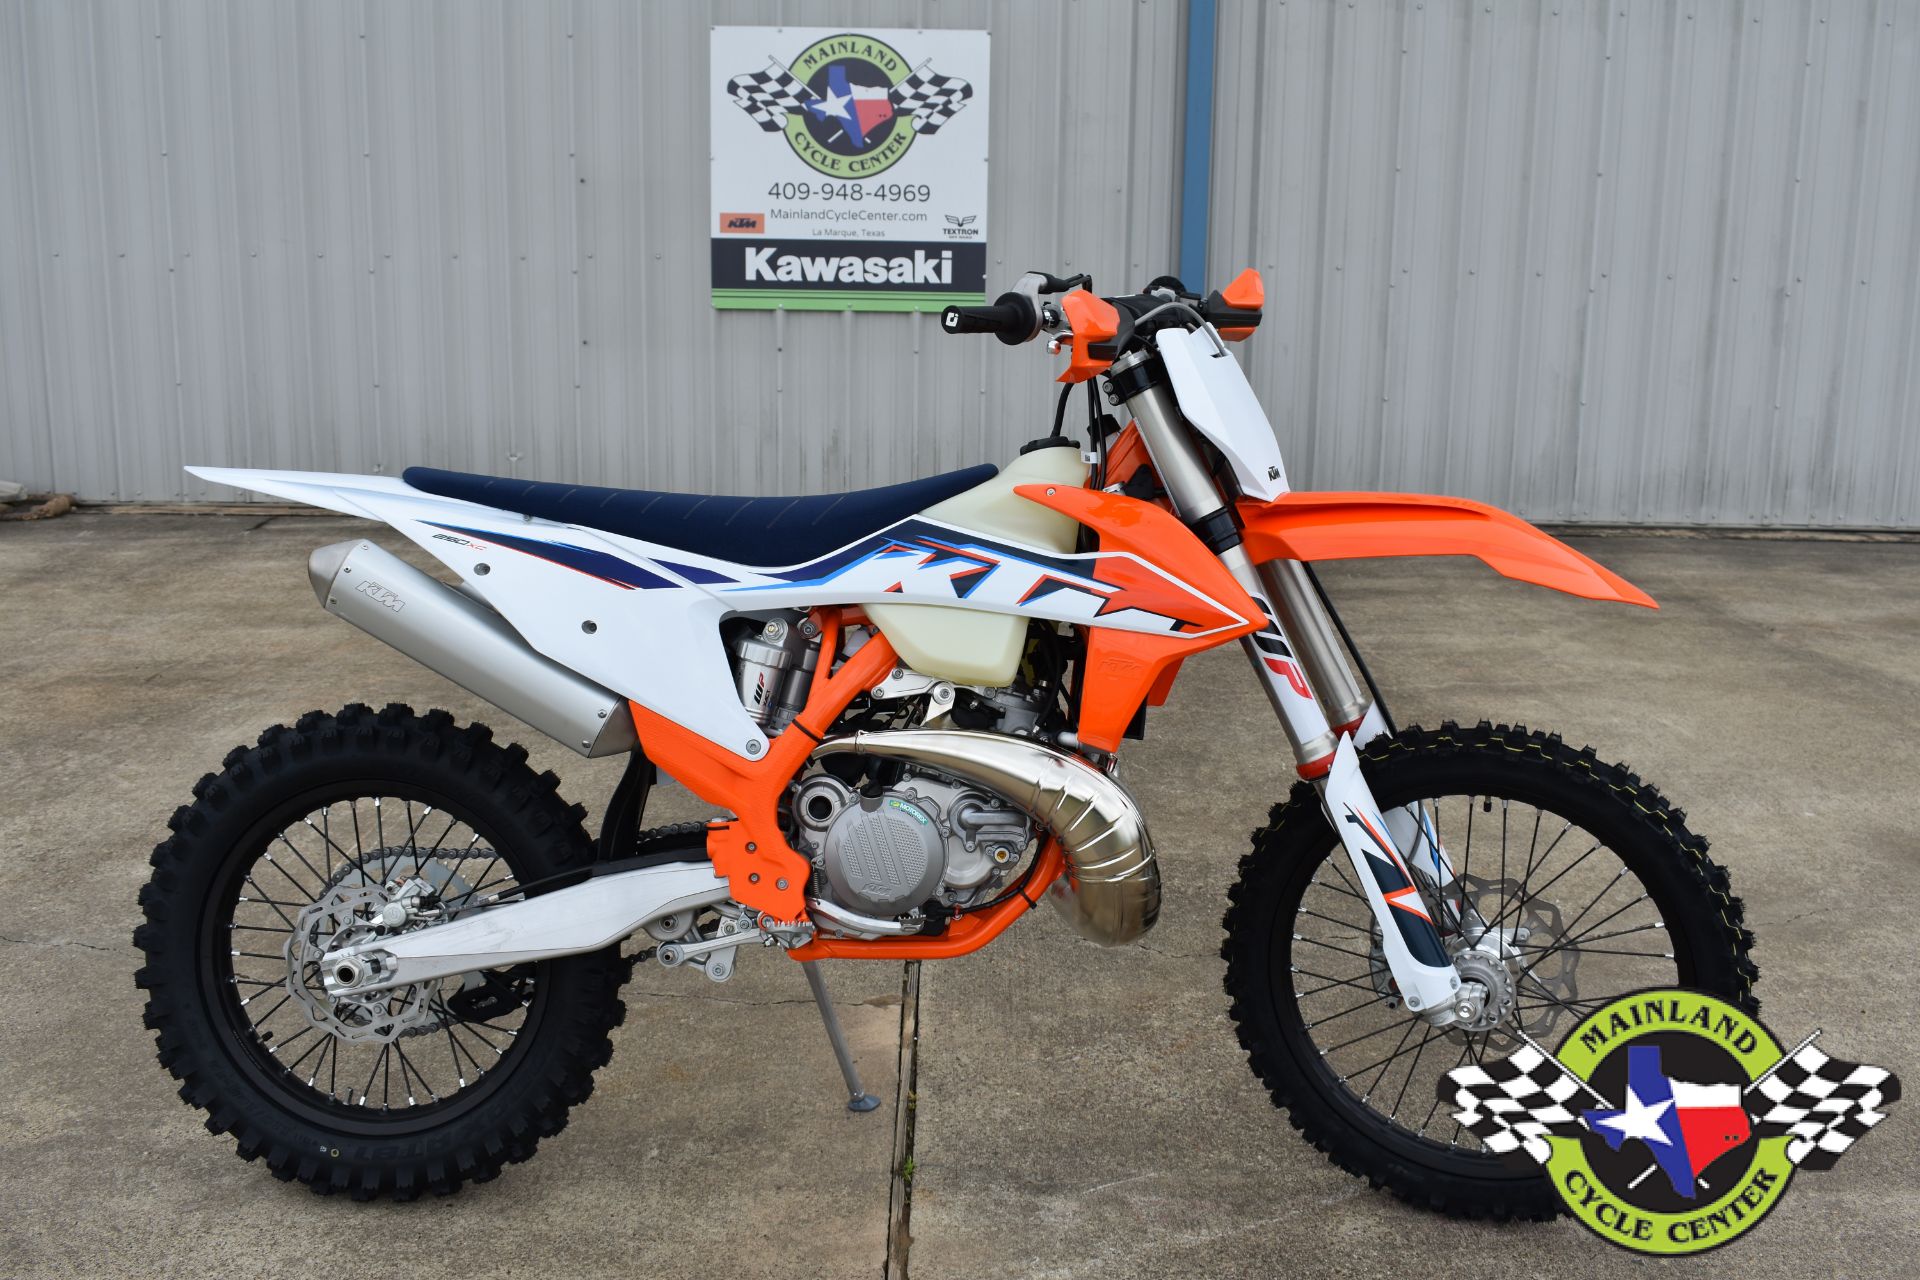 New 2022 Ktm 250 Xc Tpi Orange | Motorcycles In La Marque, Tx | Mainland  Cycle Center Llc Stock Kt0715